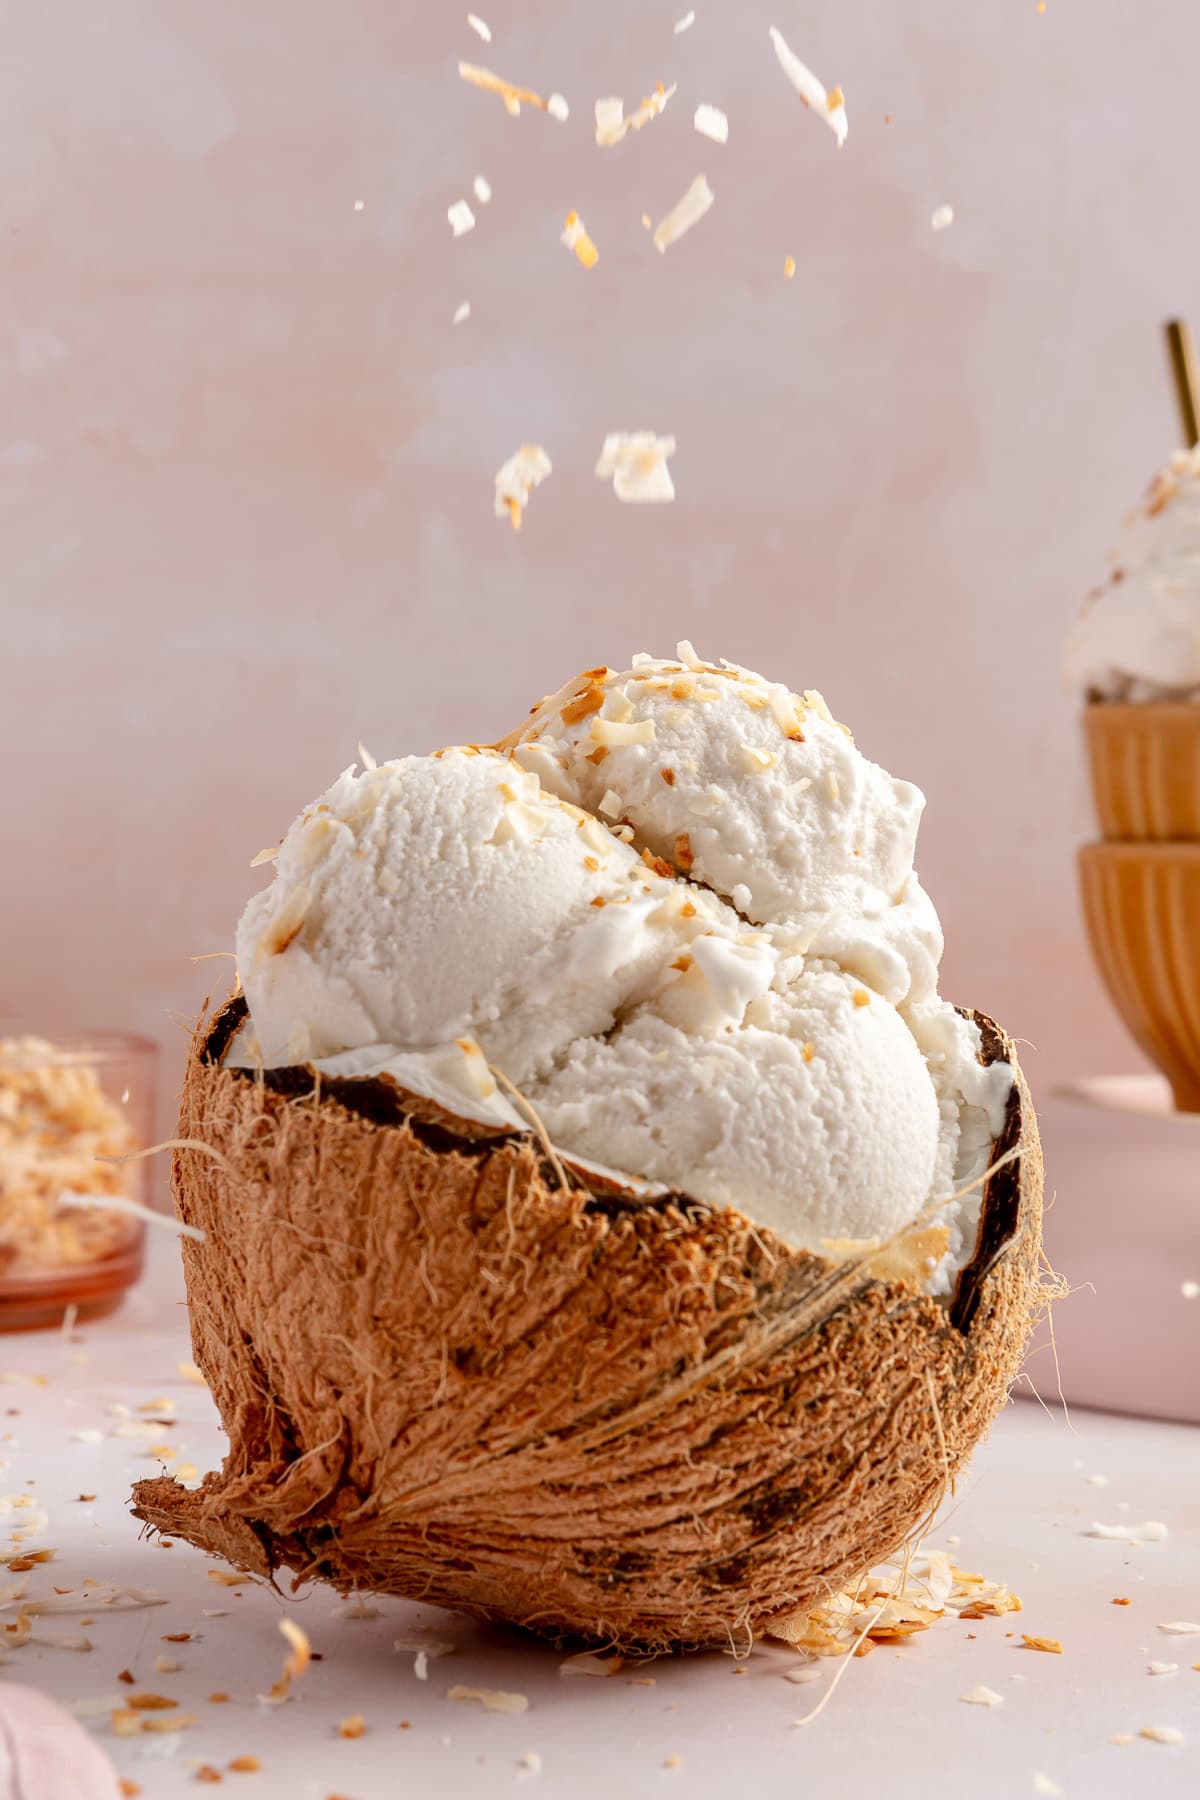 Half a coconut filled with scoops of coconut sorbet with toasted coconut being sprinkled on top.